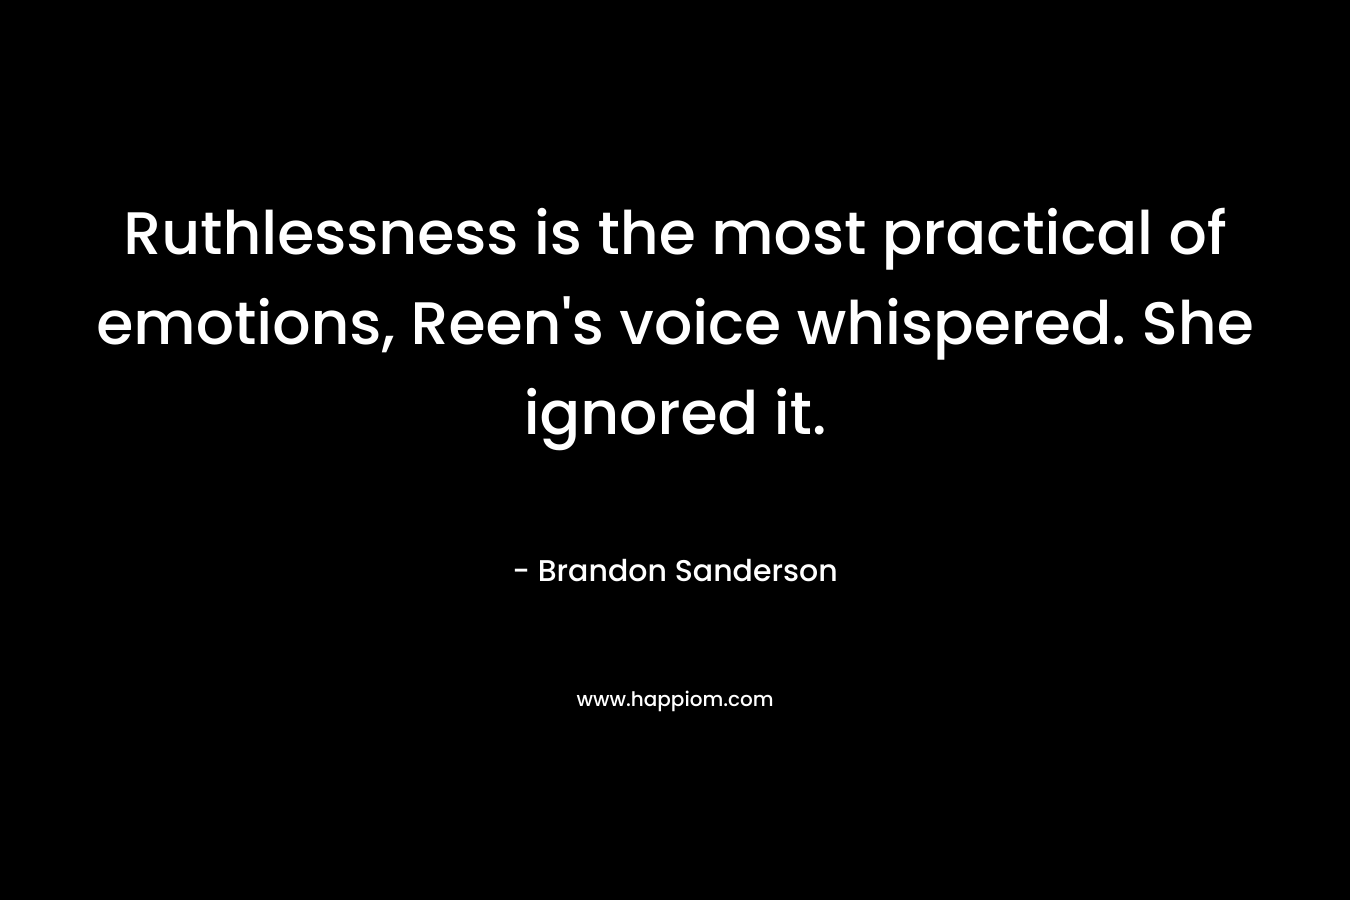 Ruthlessness is the most practical of emotions, Reen’s voice whispered. She ignored it. – Brandon Sanderson